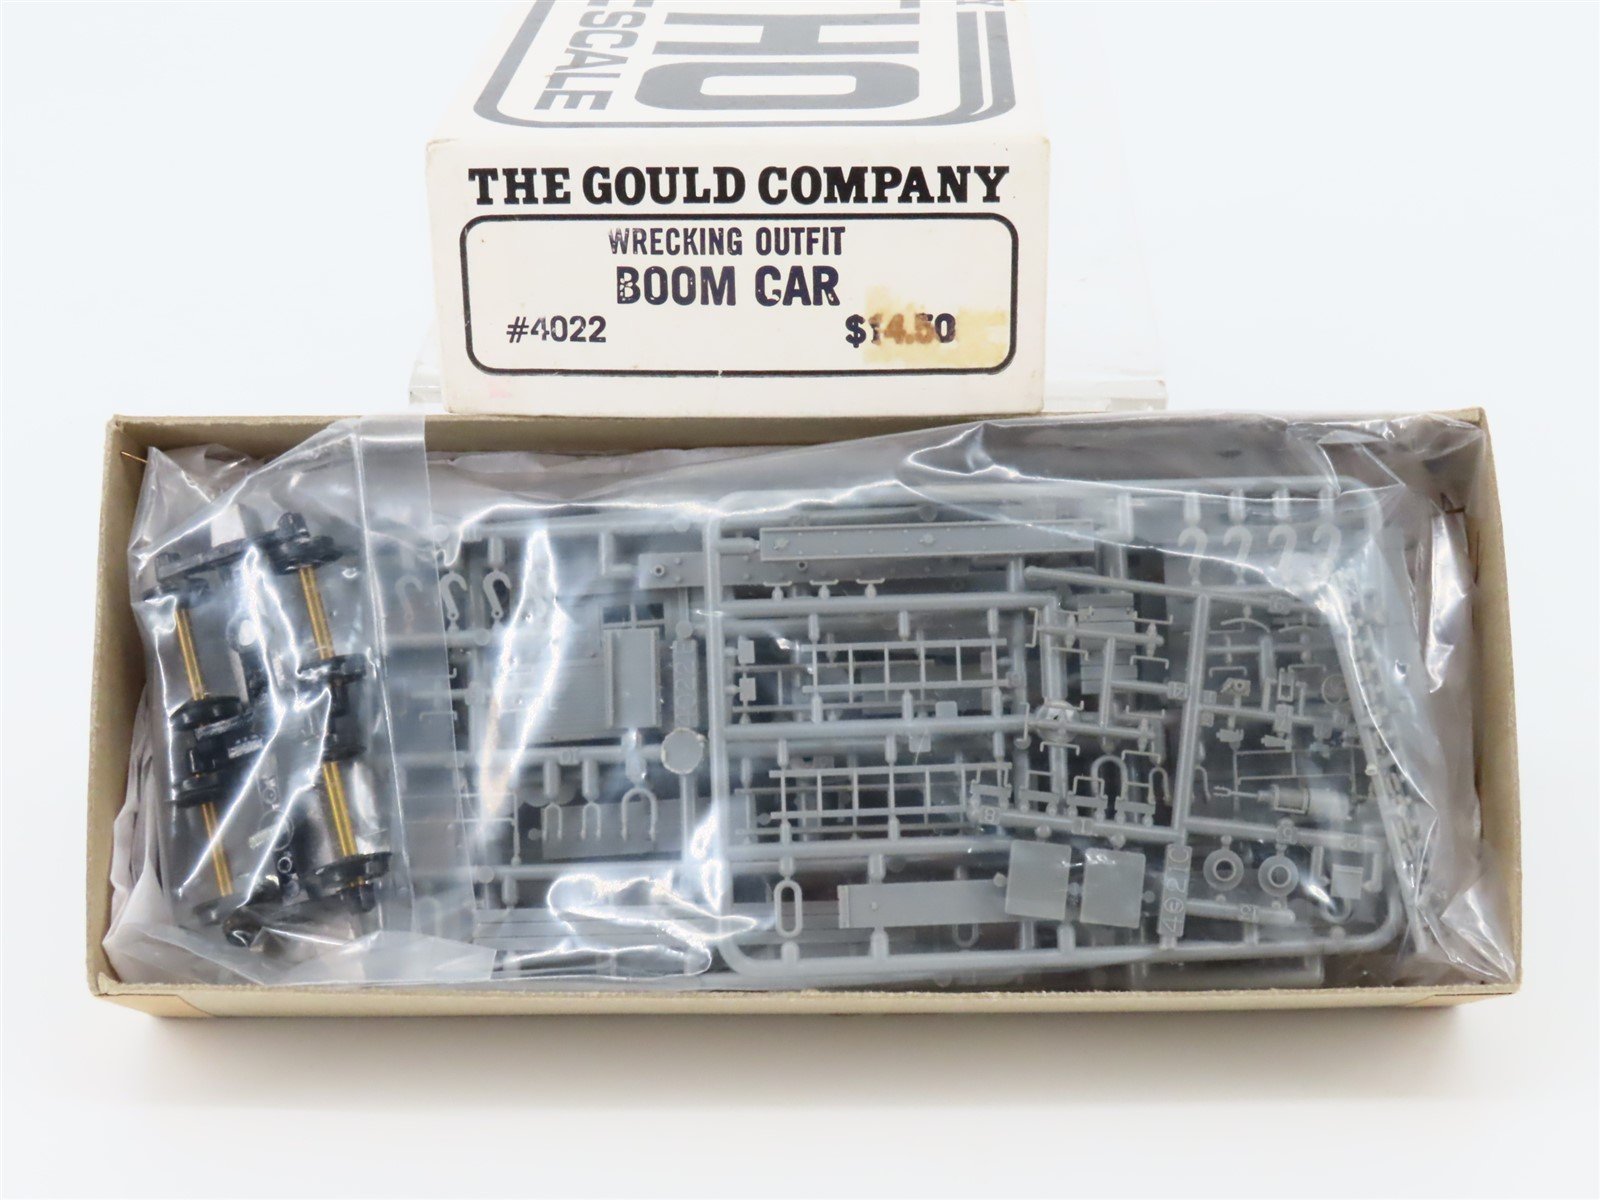 HO Scale The Gould Company 4022 Wrecking Outfit Boom Car Kit